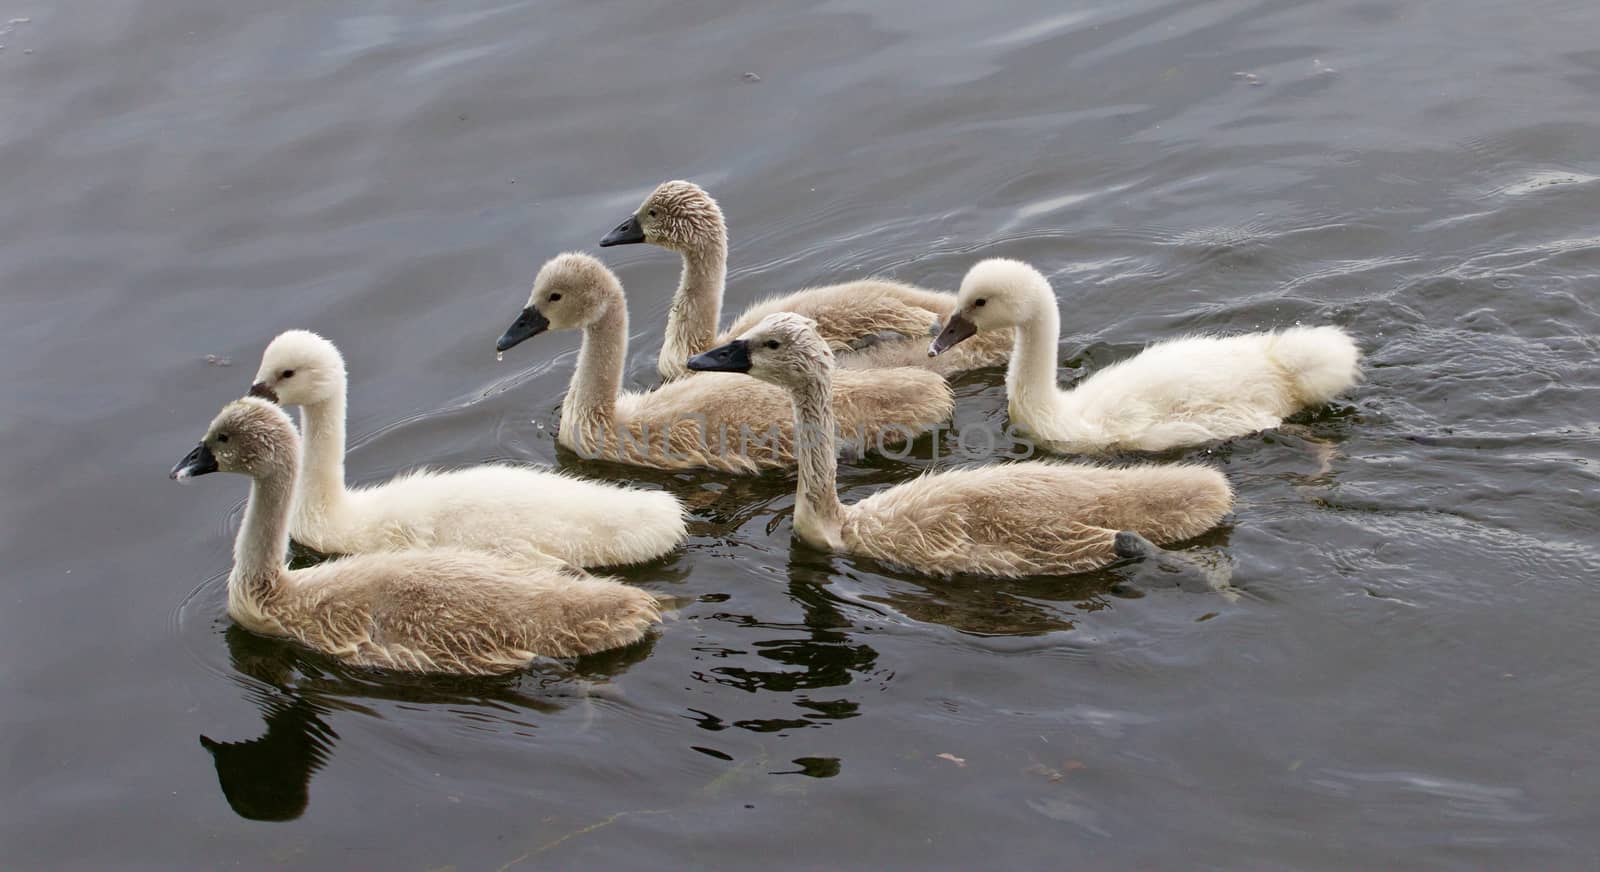 Six cute young swans are swimming together in the lake